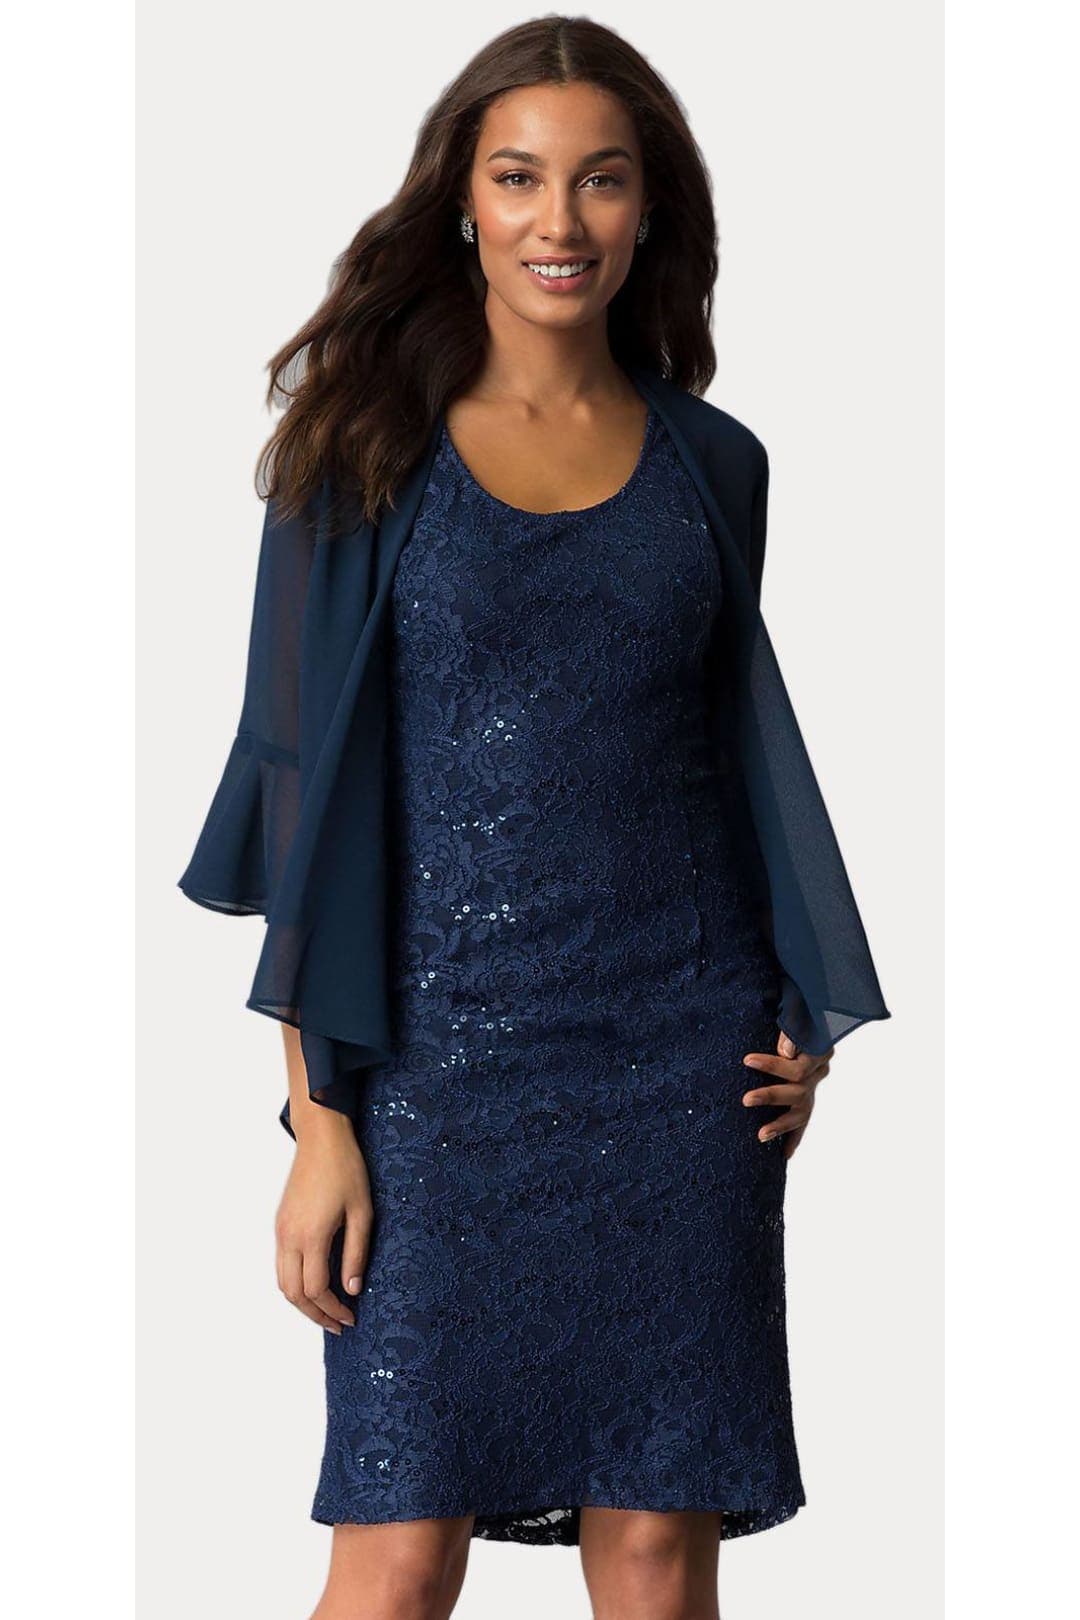 Plus Size Dress For Mother of the Bride - NAVY BLUE / M